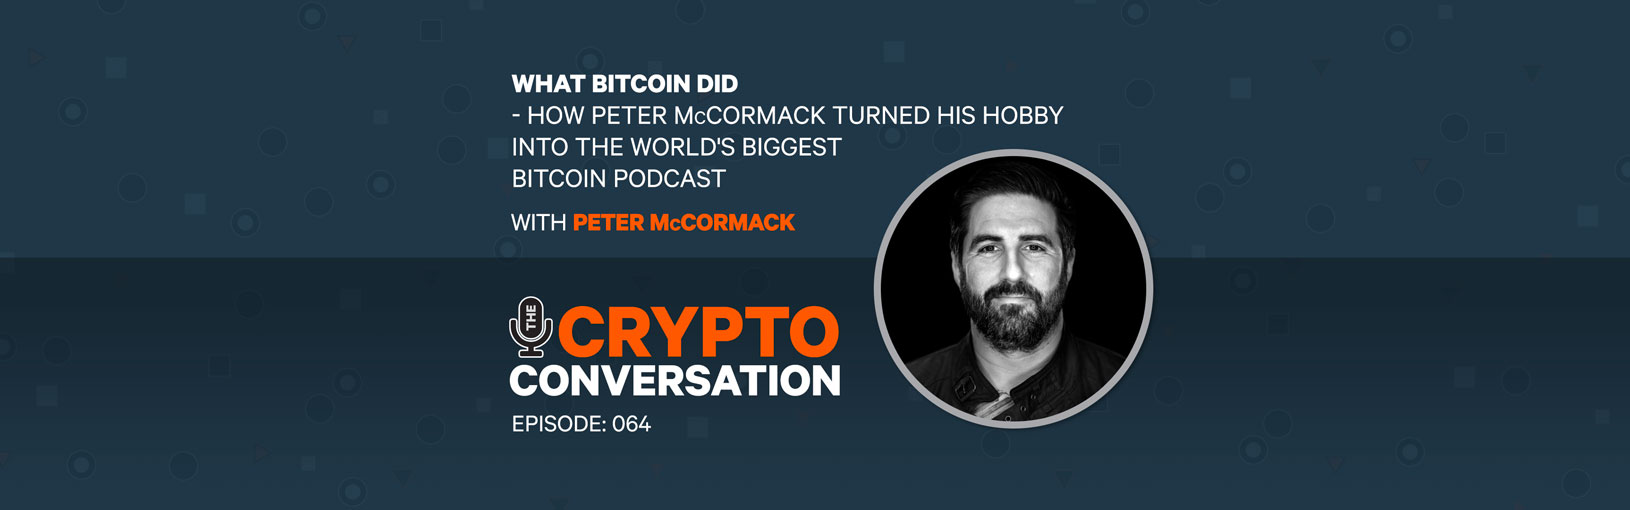 How Peter McCormack turned his hobby into the world’s biggest Bitcoin podcast